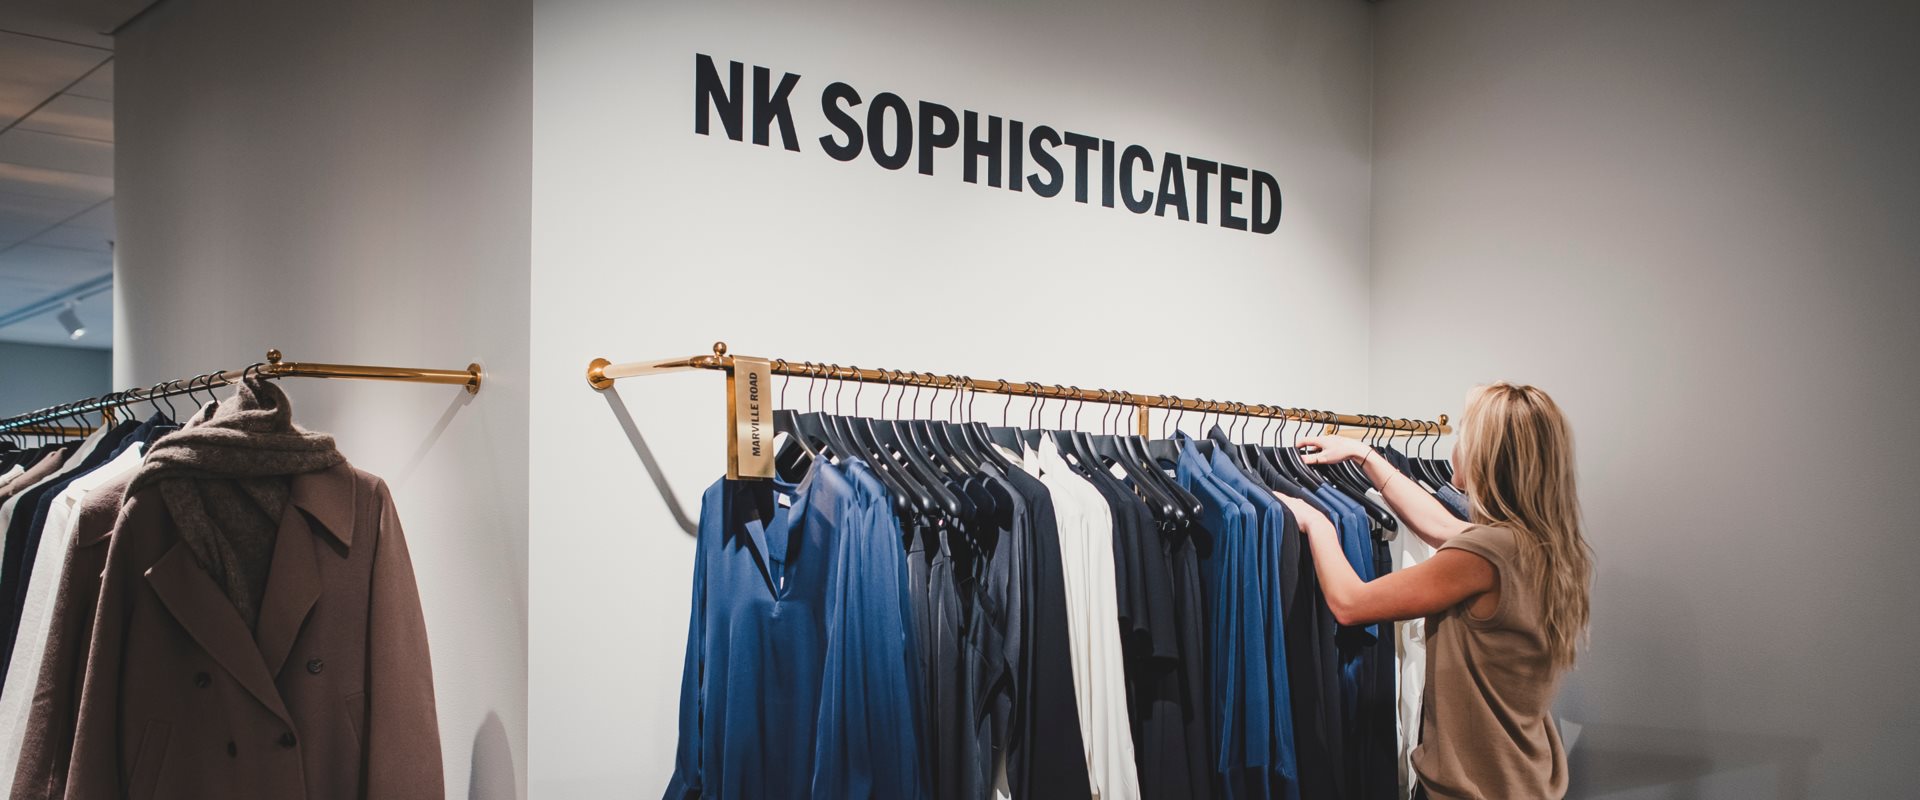 NK SOPHISTICATED